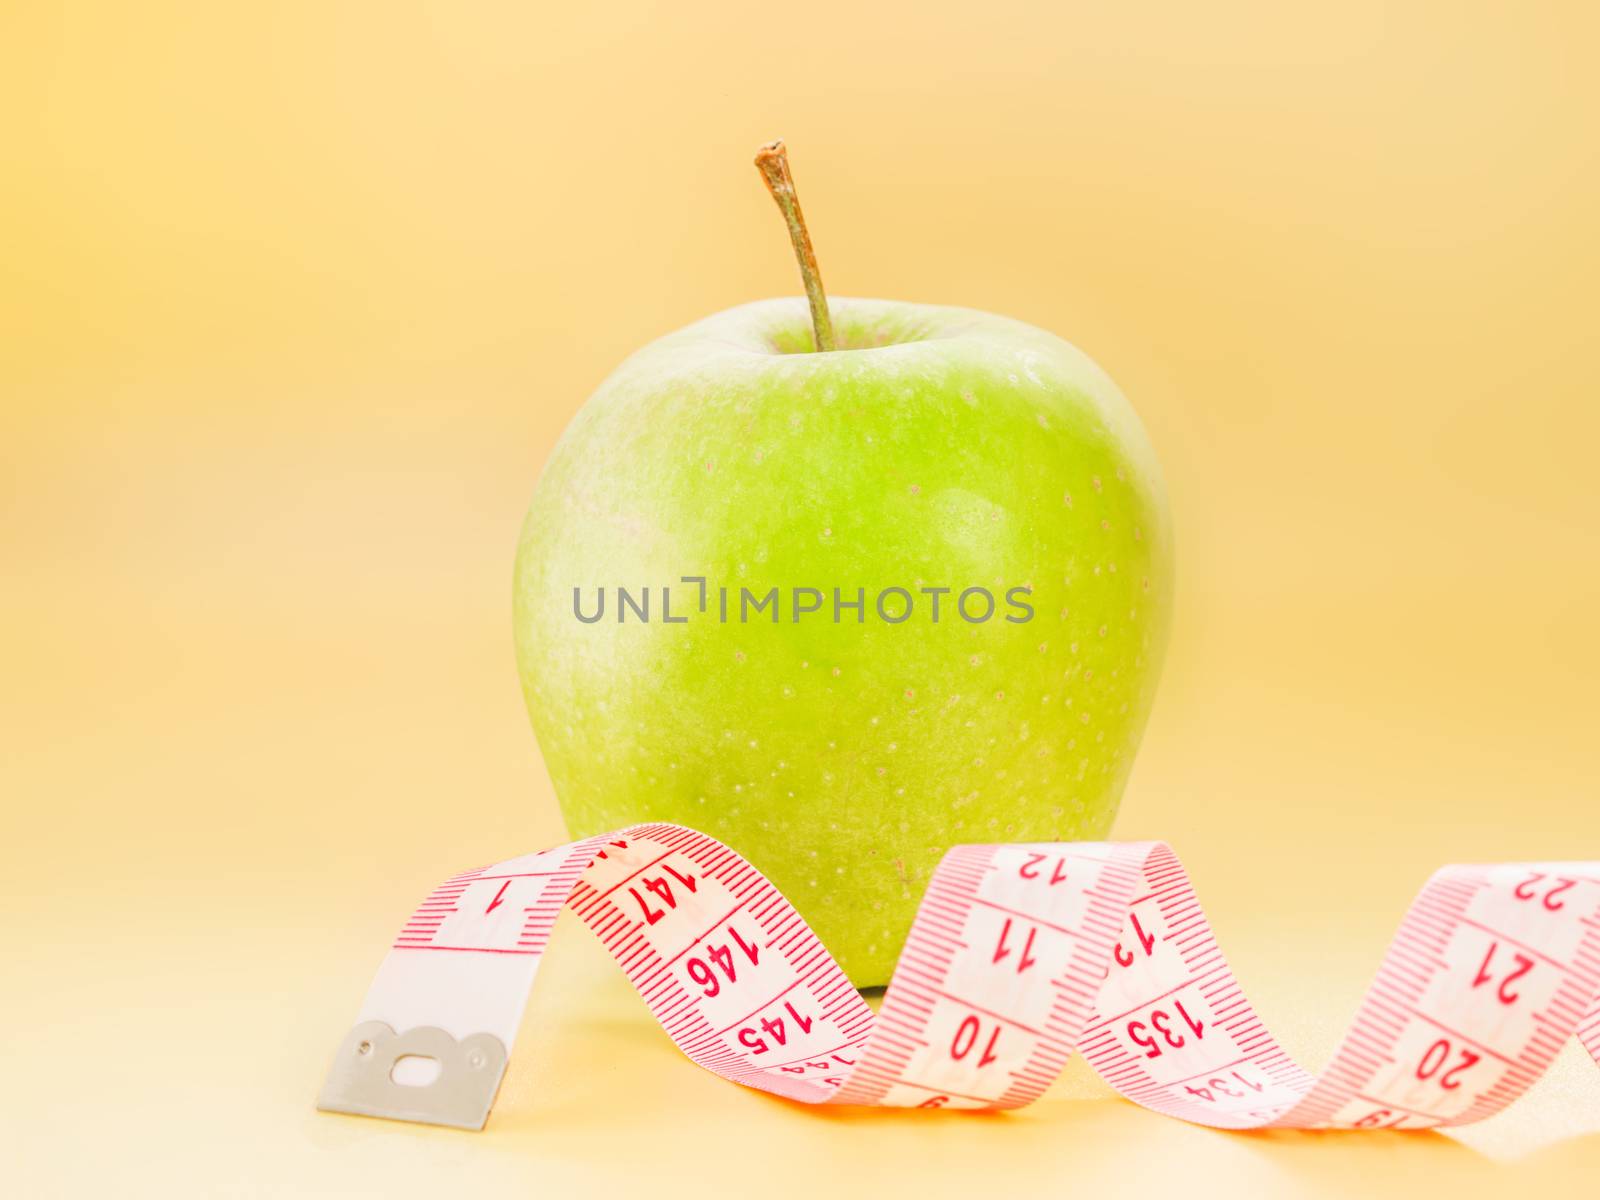 Measuring tape and delicious green apple on bright yellow background. Diet or healthy eating concept.